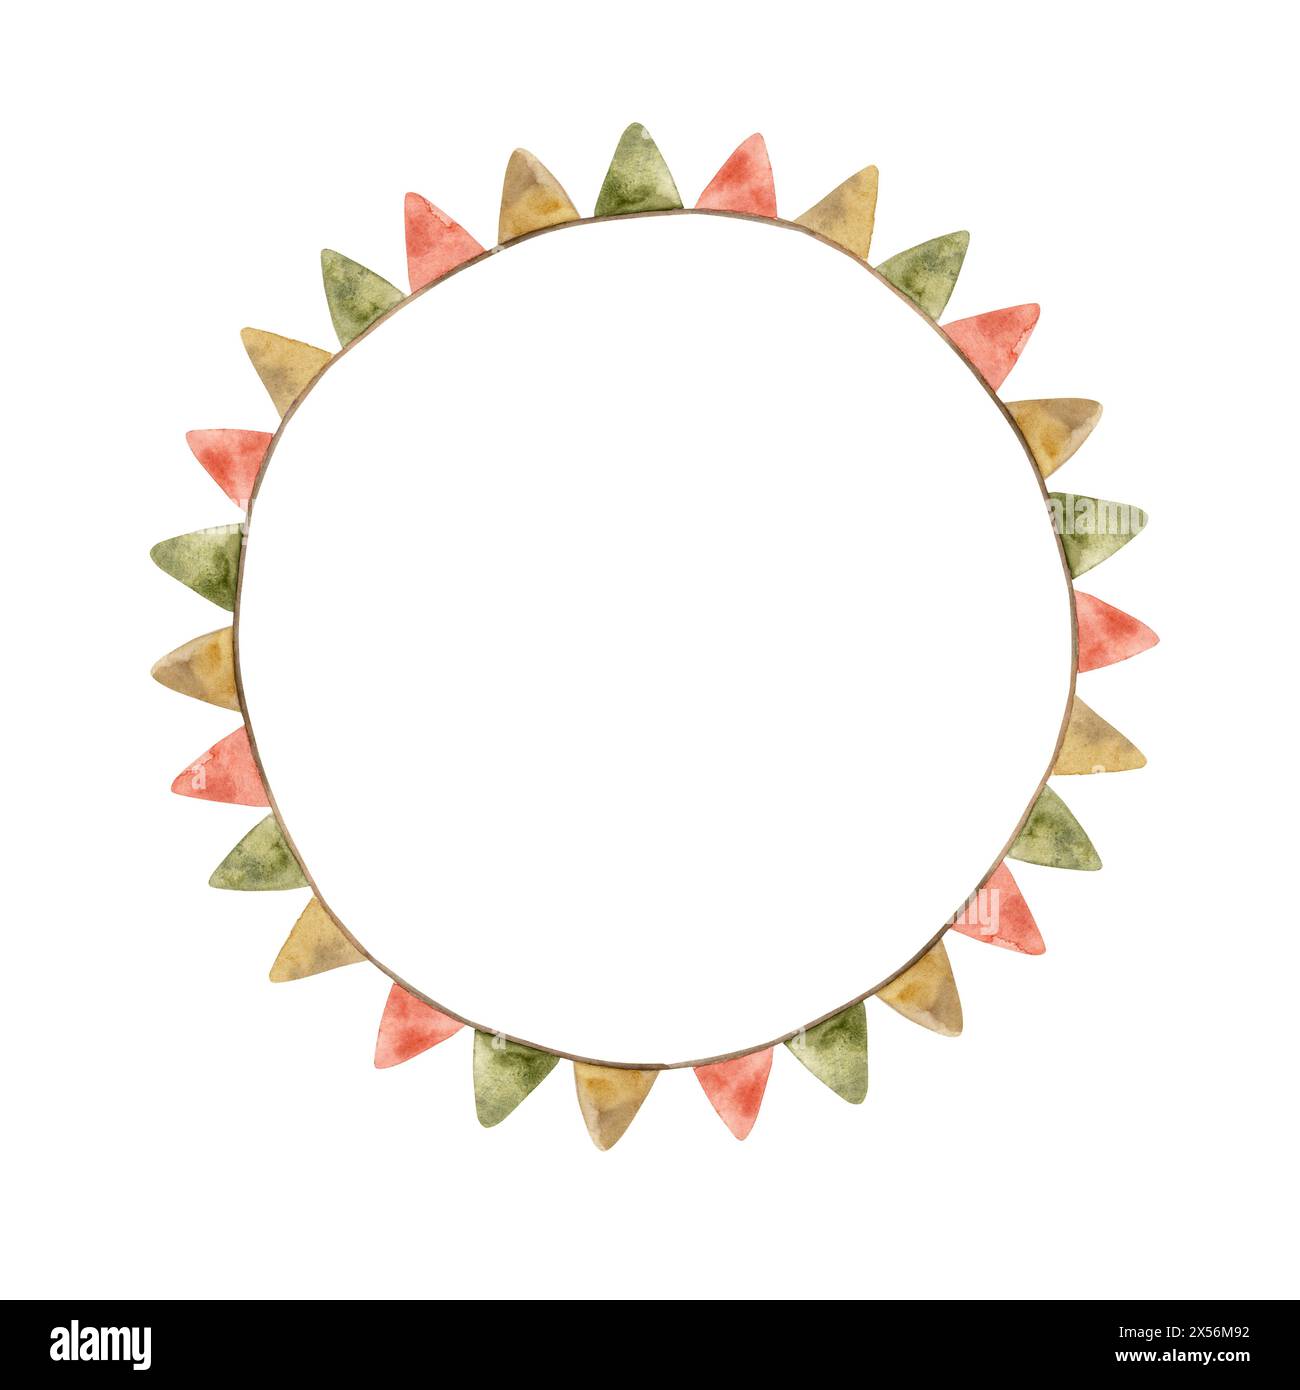 A round wreath of children's flags of different colors, red, green, yellow. Watercolor illustration for cards, stickers, textiles, design, invitations Stock Photo